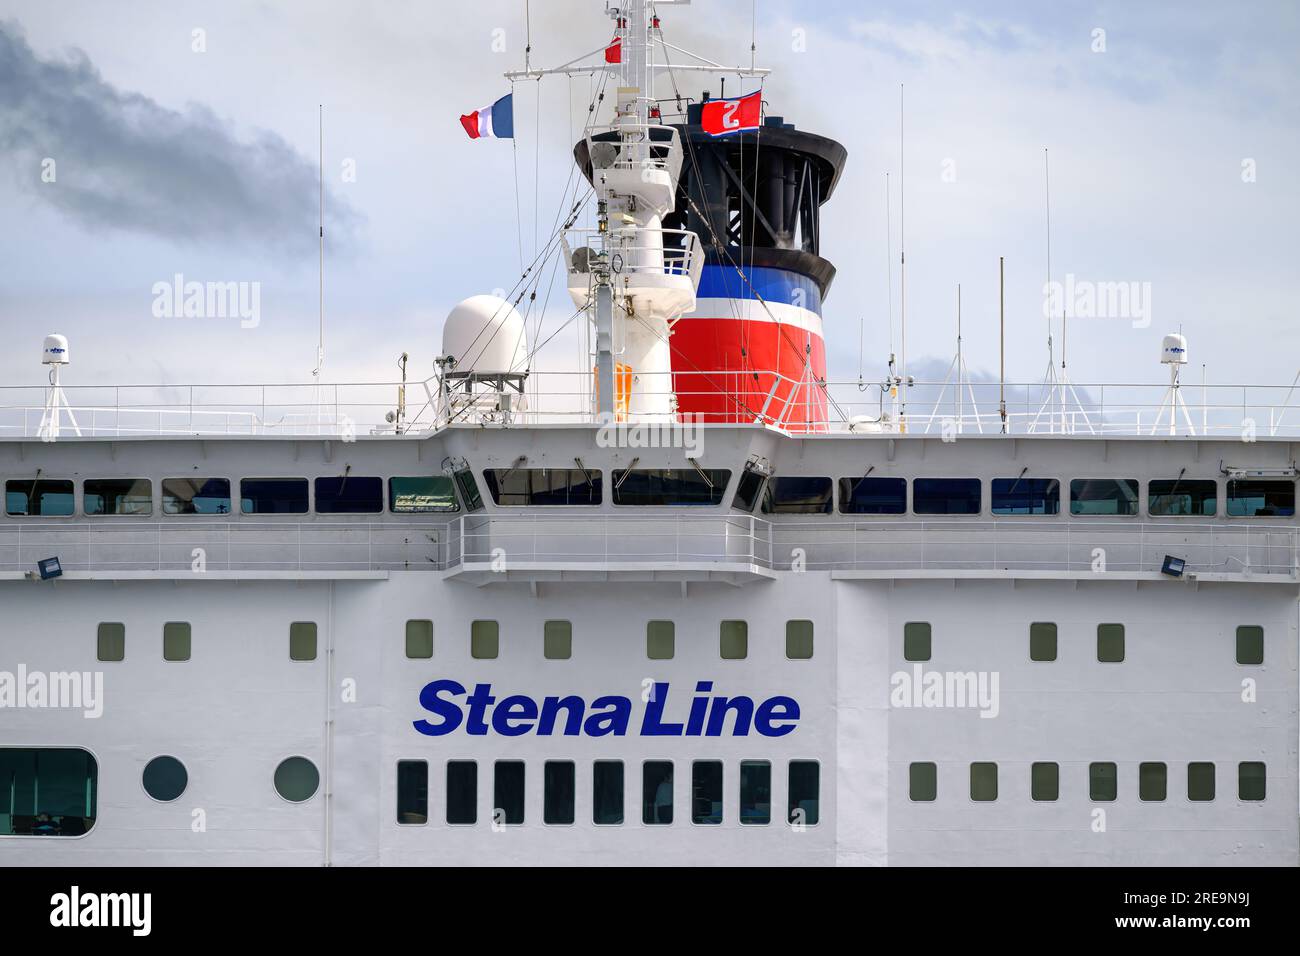 A detail view of the bridge of the Stena Line cross-Channel ferry Stena Vision. Stock Photo